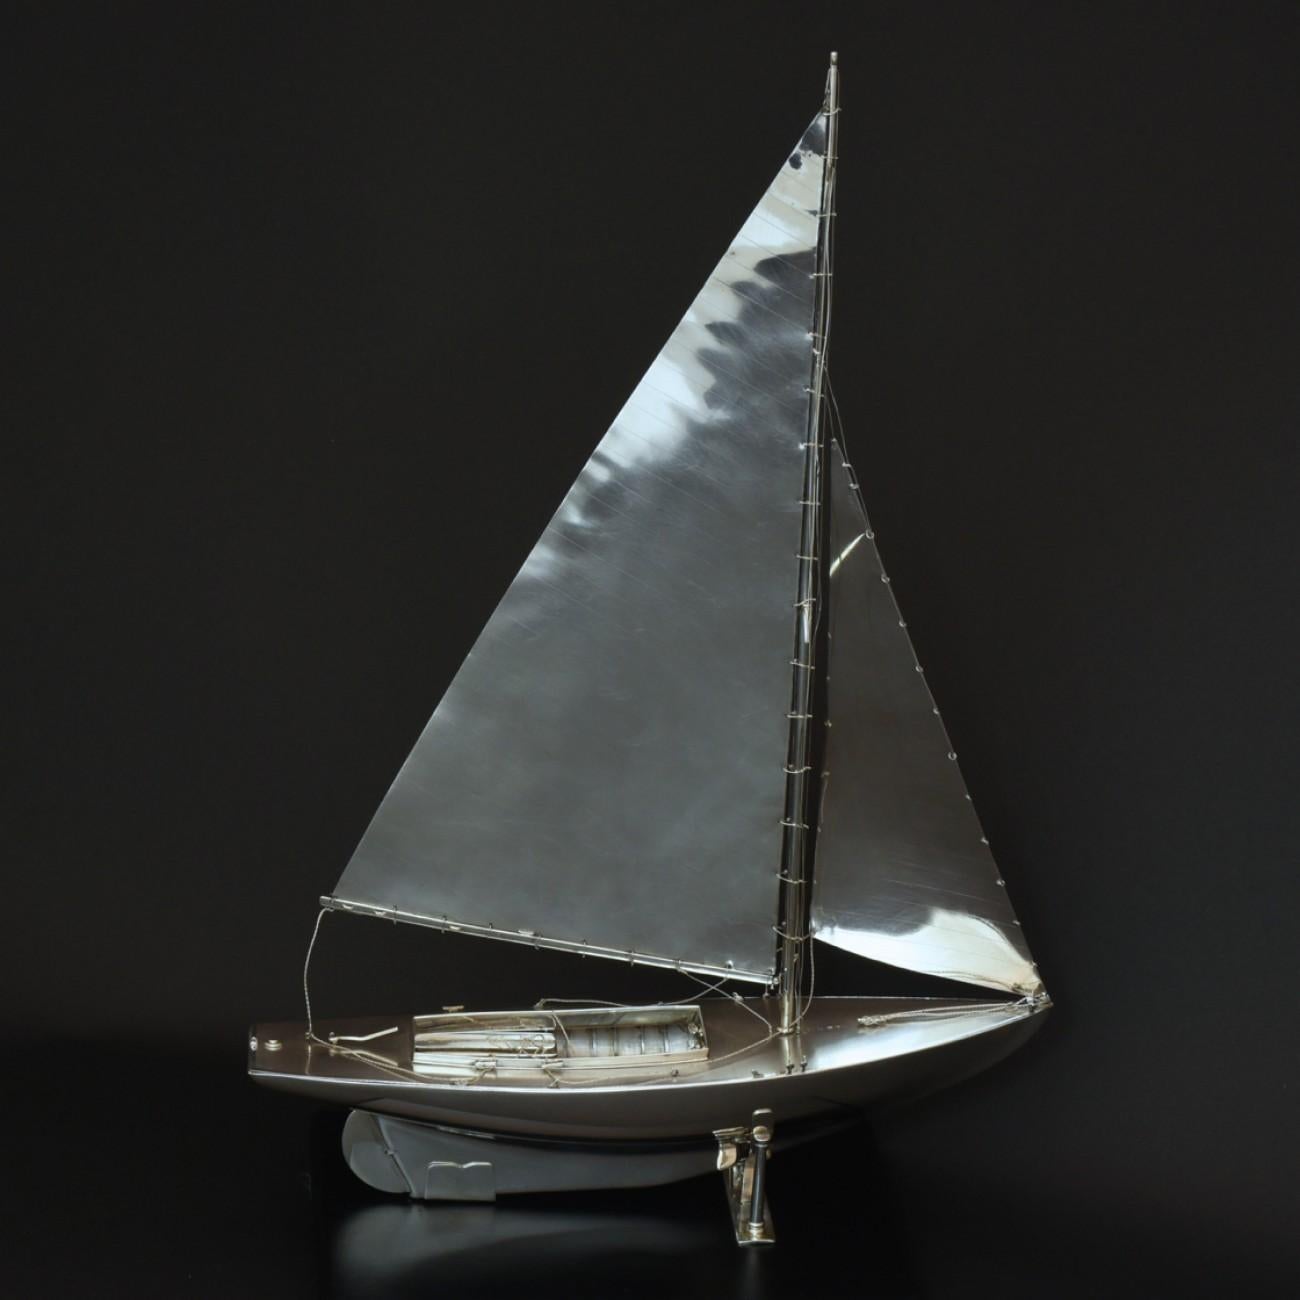 An exceptional scale model of a Mylne O.D. class yacht made in sterling silver, hall marked 1935. Beautifully detailed, it even has sterling silver rigging and sails!

Benzie of Cowes was established in 1862 by the late Mr. Simpson Benzie. Through